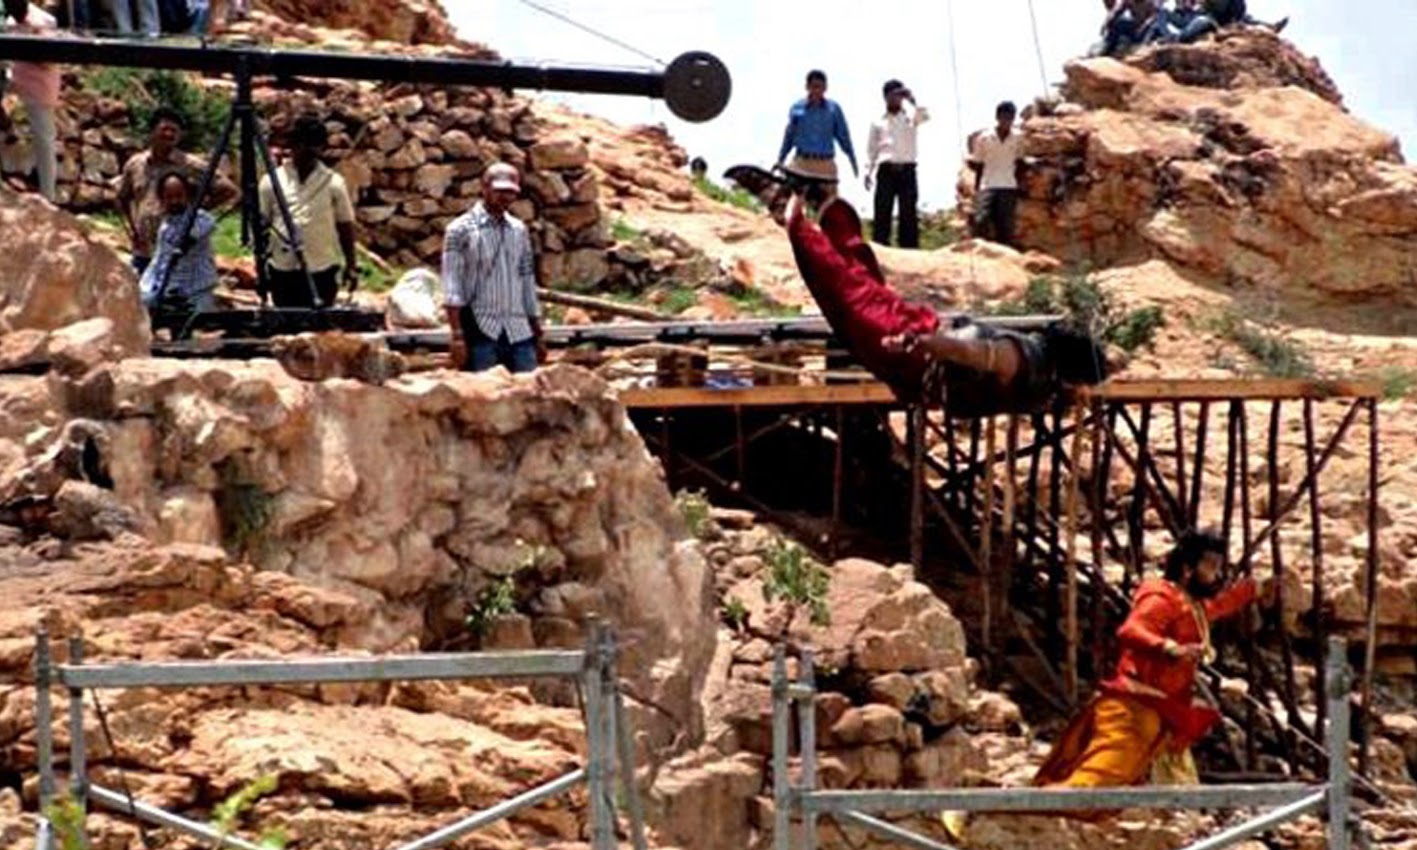 Fire Accident on Baahubali Sets